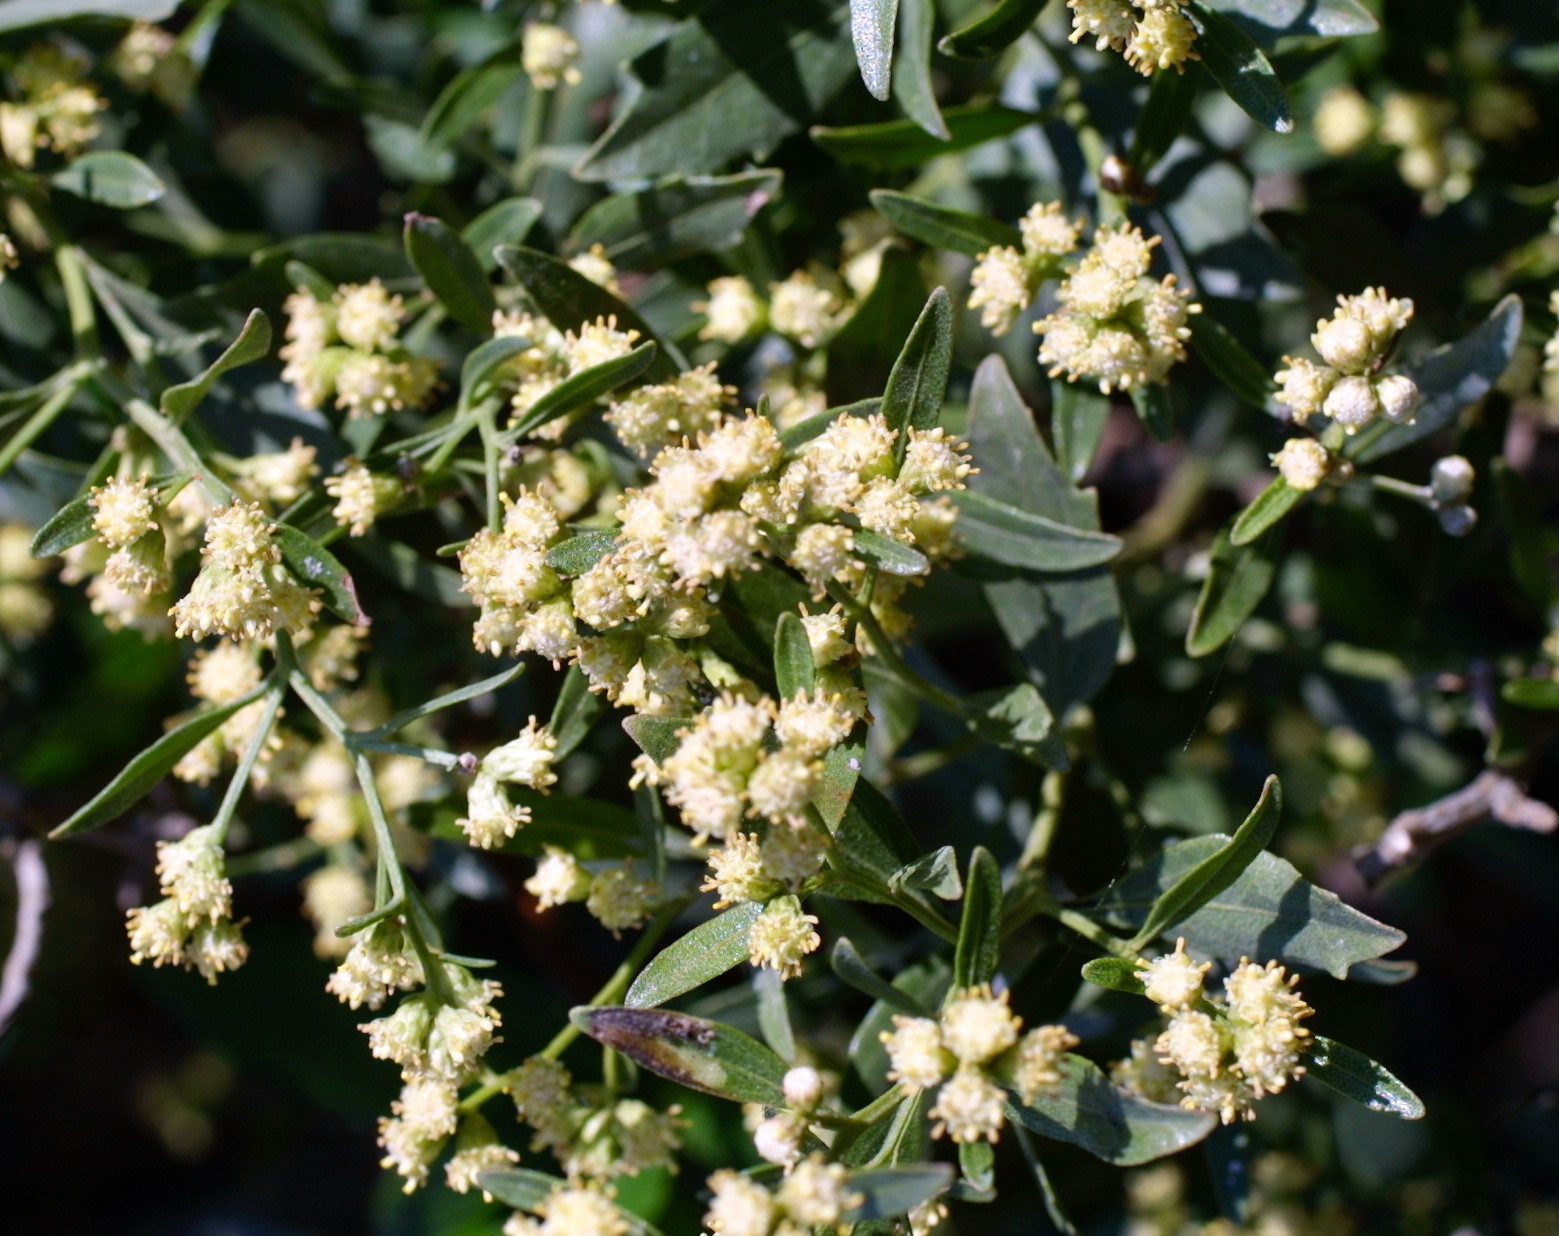 The Scientific Name is Baccharis halimifolia. You will likely hear them called Silverling, High-tide Bush, Mullet Bush, Groundsel Tree, Sea Myrtle. This picture shows the Female flowers. of Baccharis halimifolia